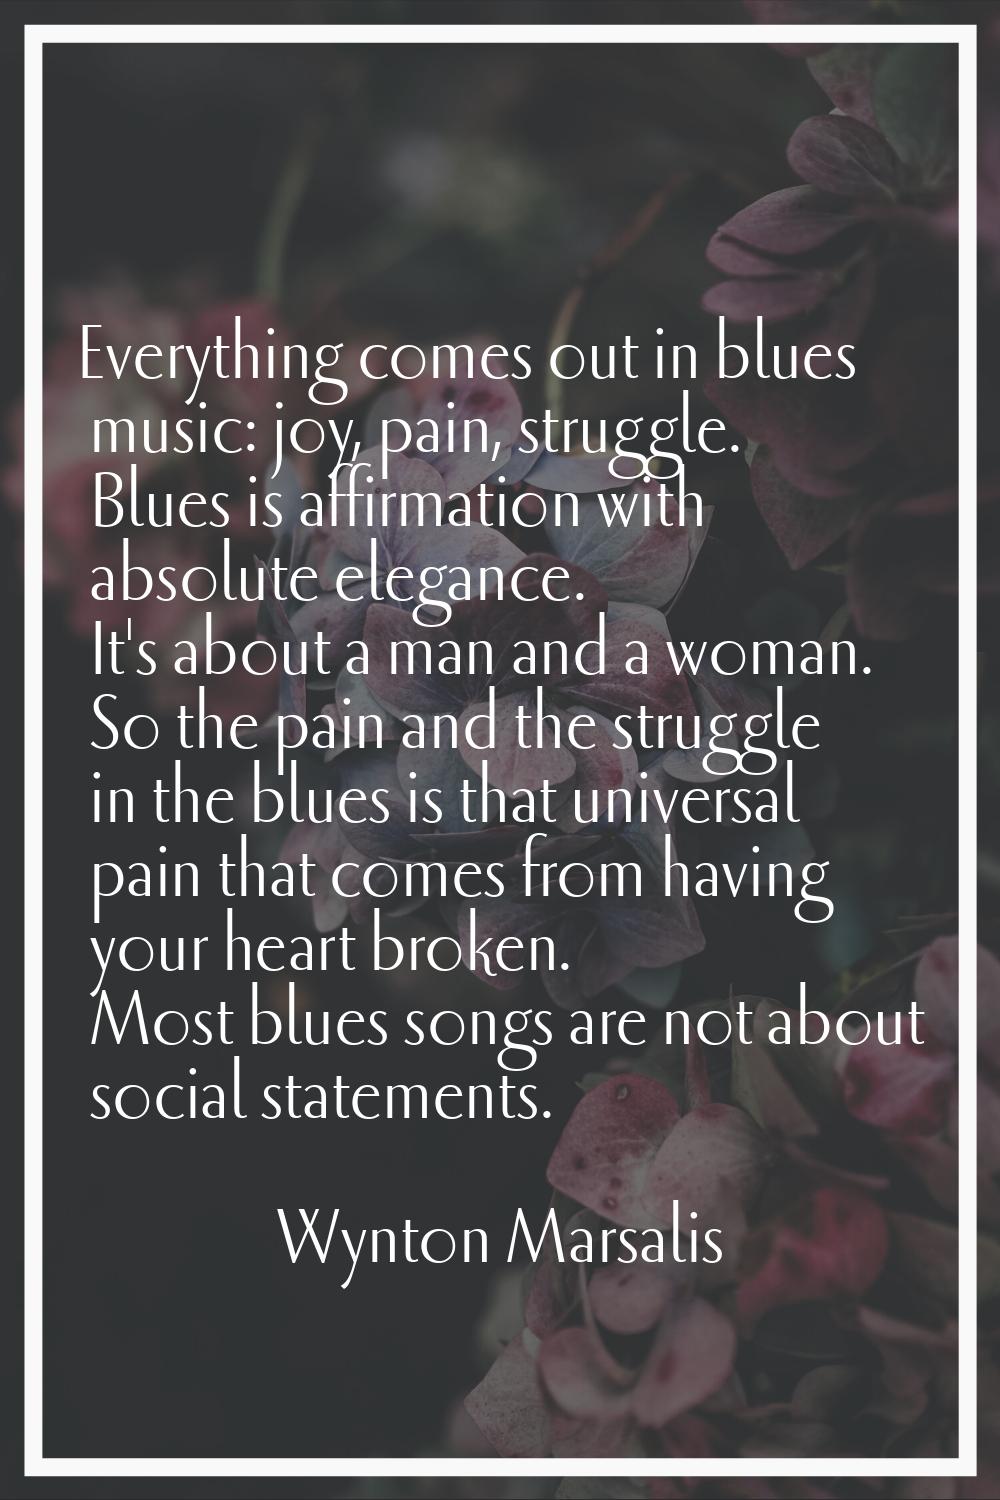 Everything comes out in blues music: joy, pain, struggle. Blues is affirmation with absolute elegan